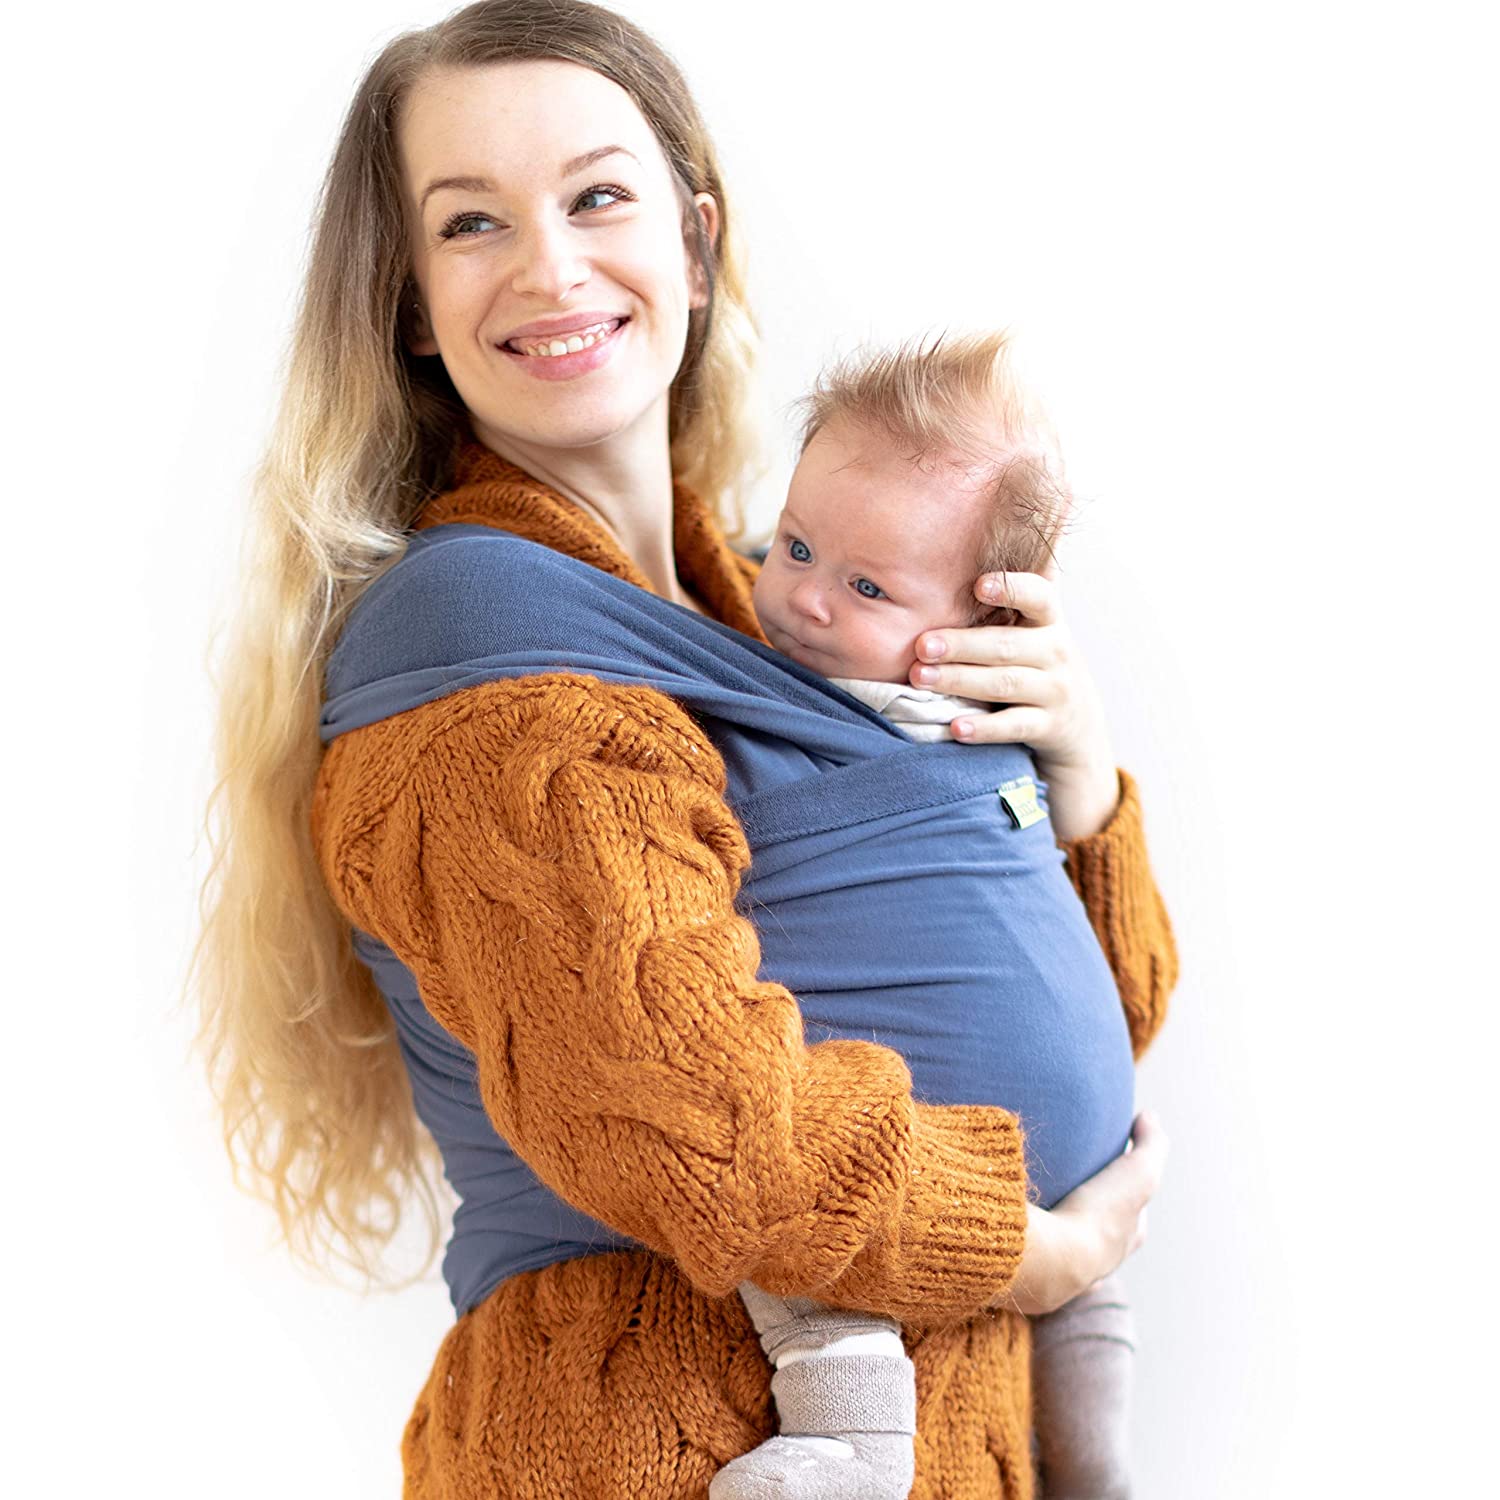 Boba Baby wrap, very easy to tie, ideal for newborns and toddlers up to 16 kg.